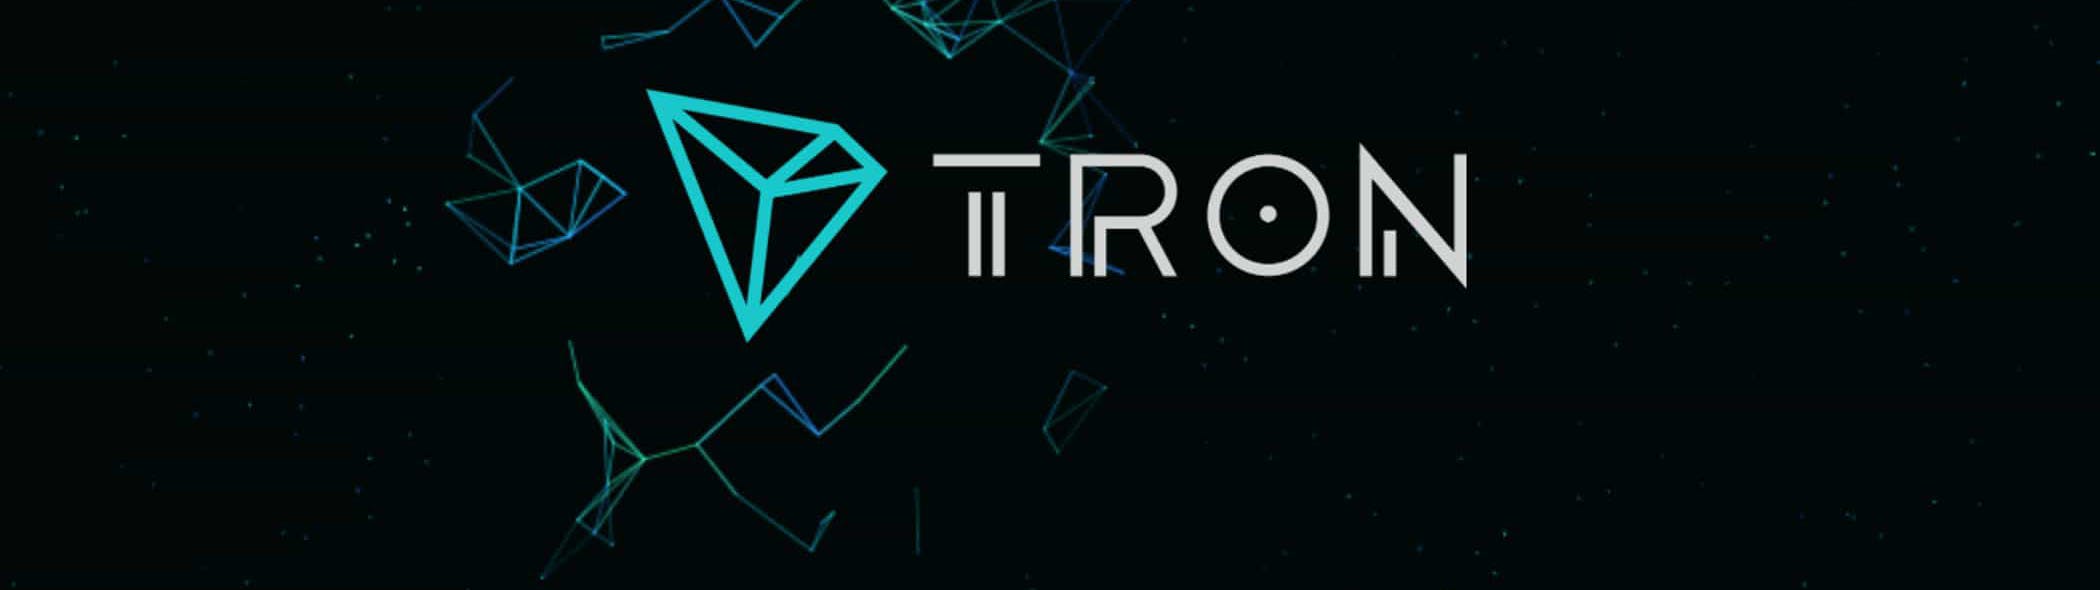 What Is Tron?